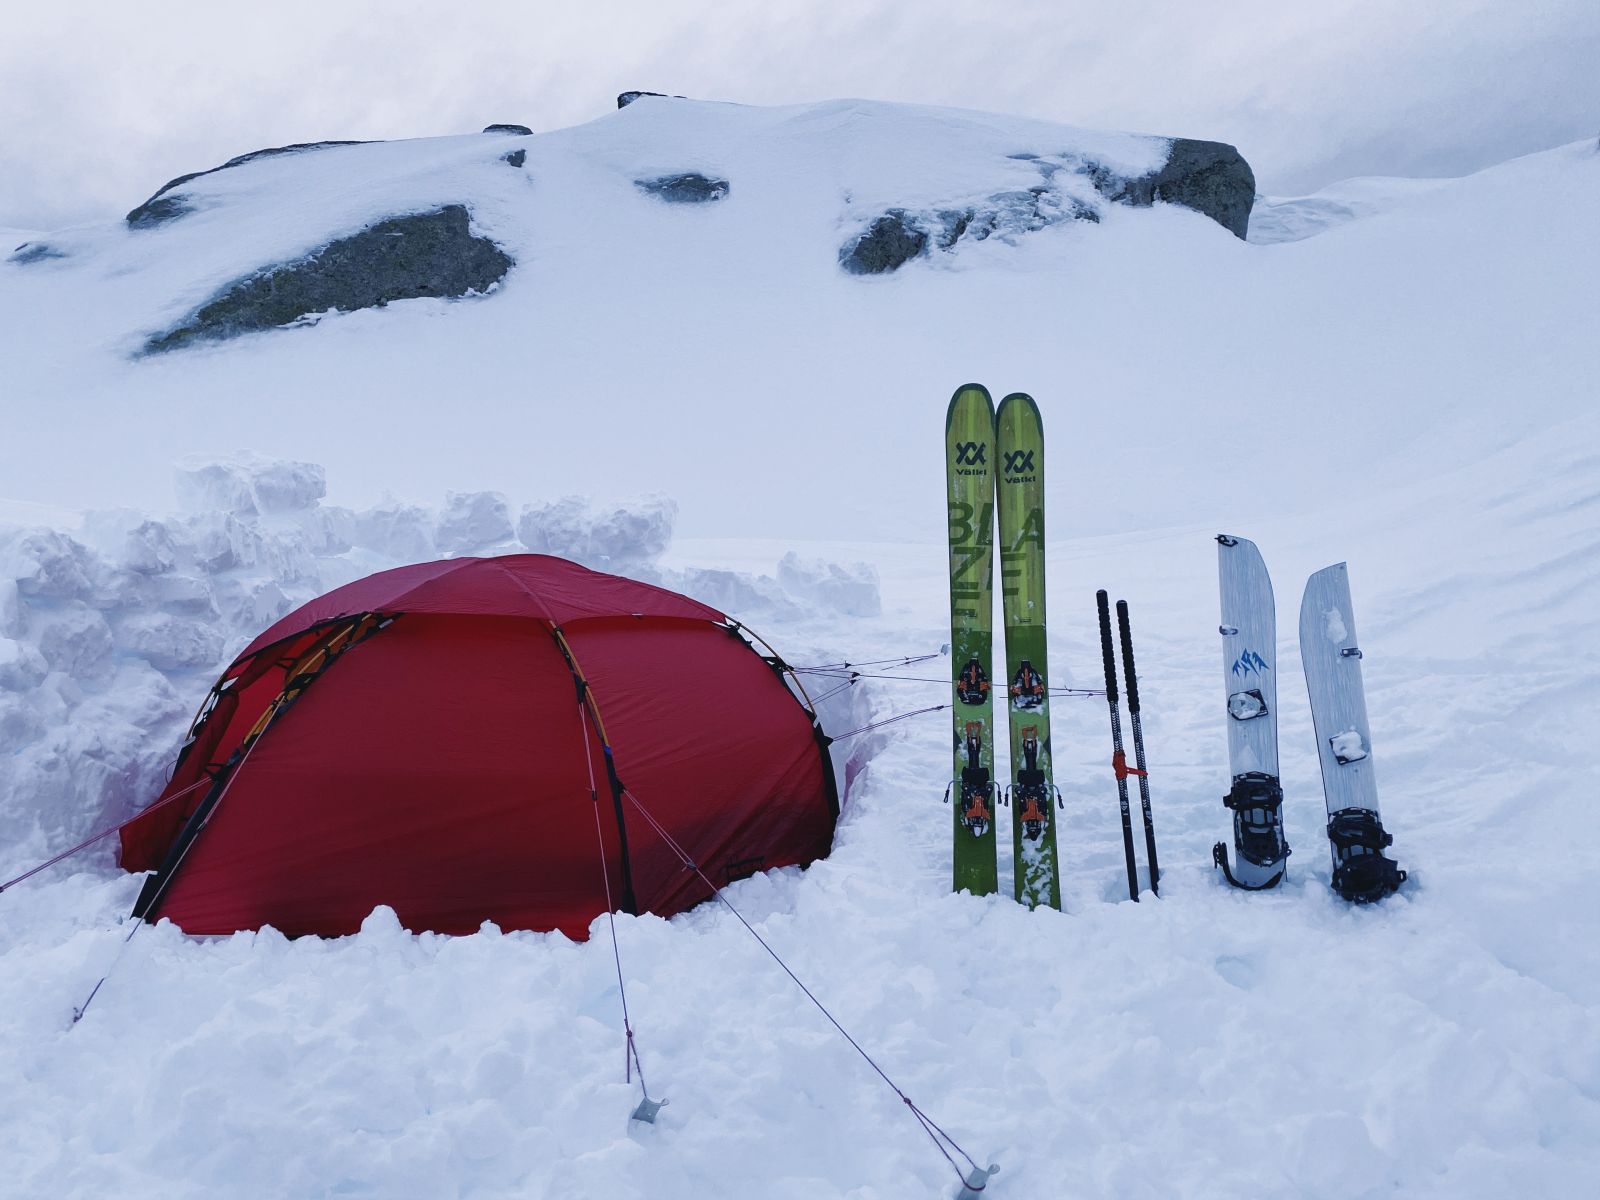 Red Hilleberg tent camping in the snow with skis and touring equipment